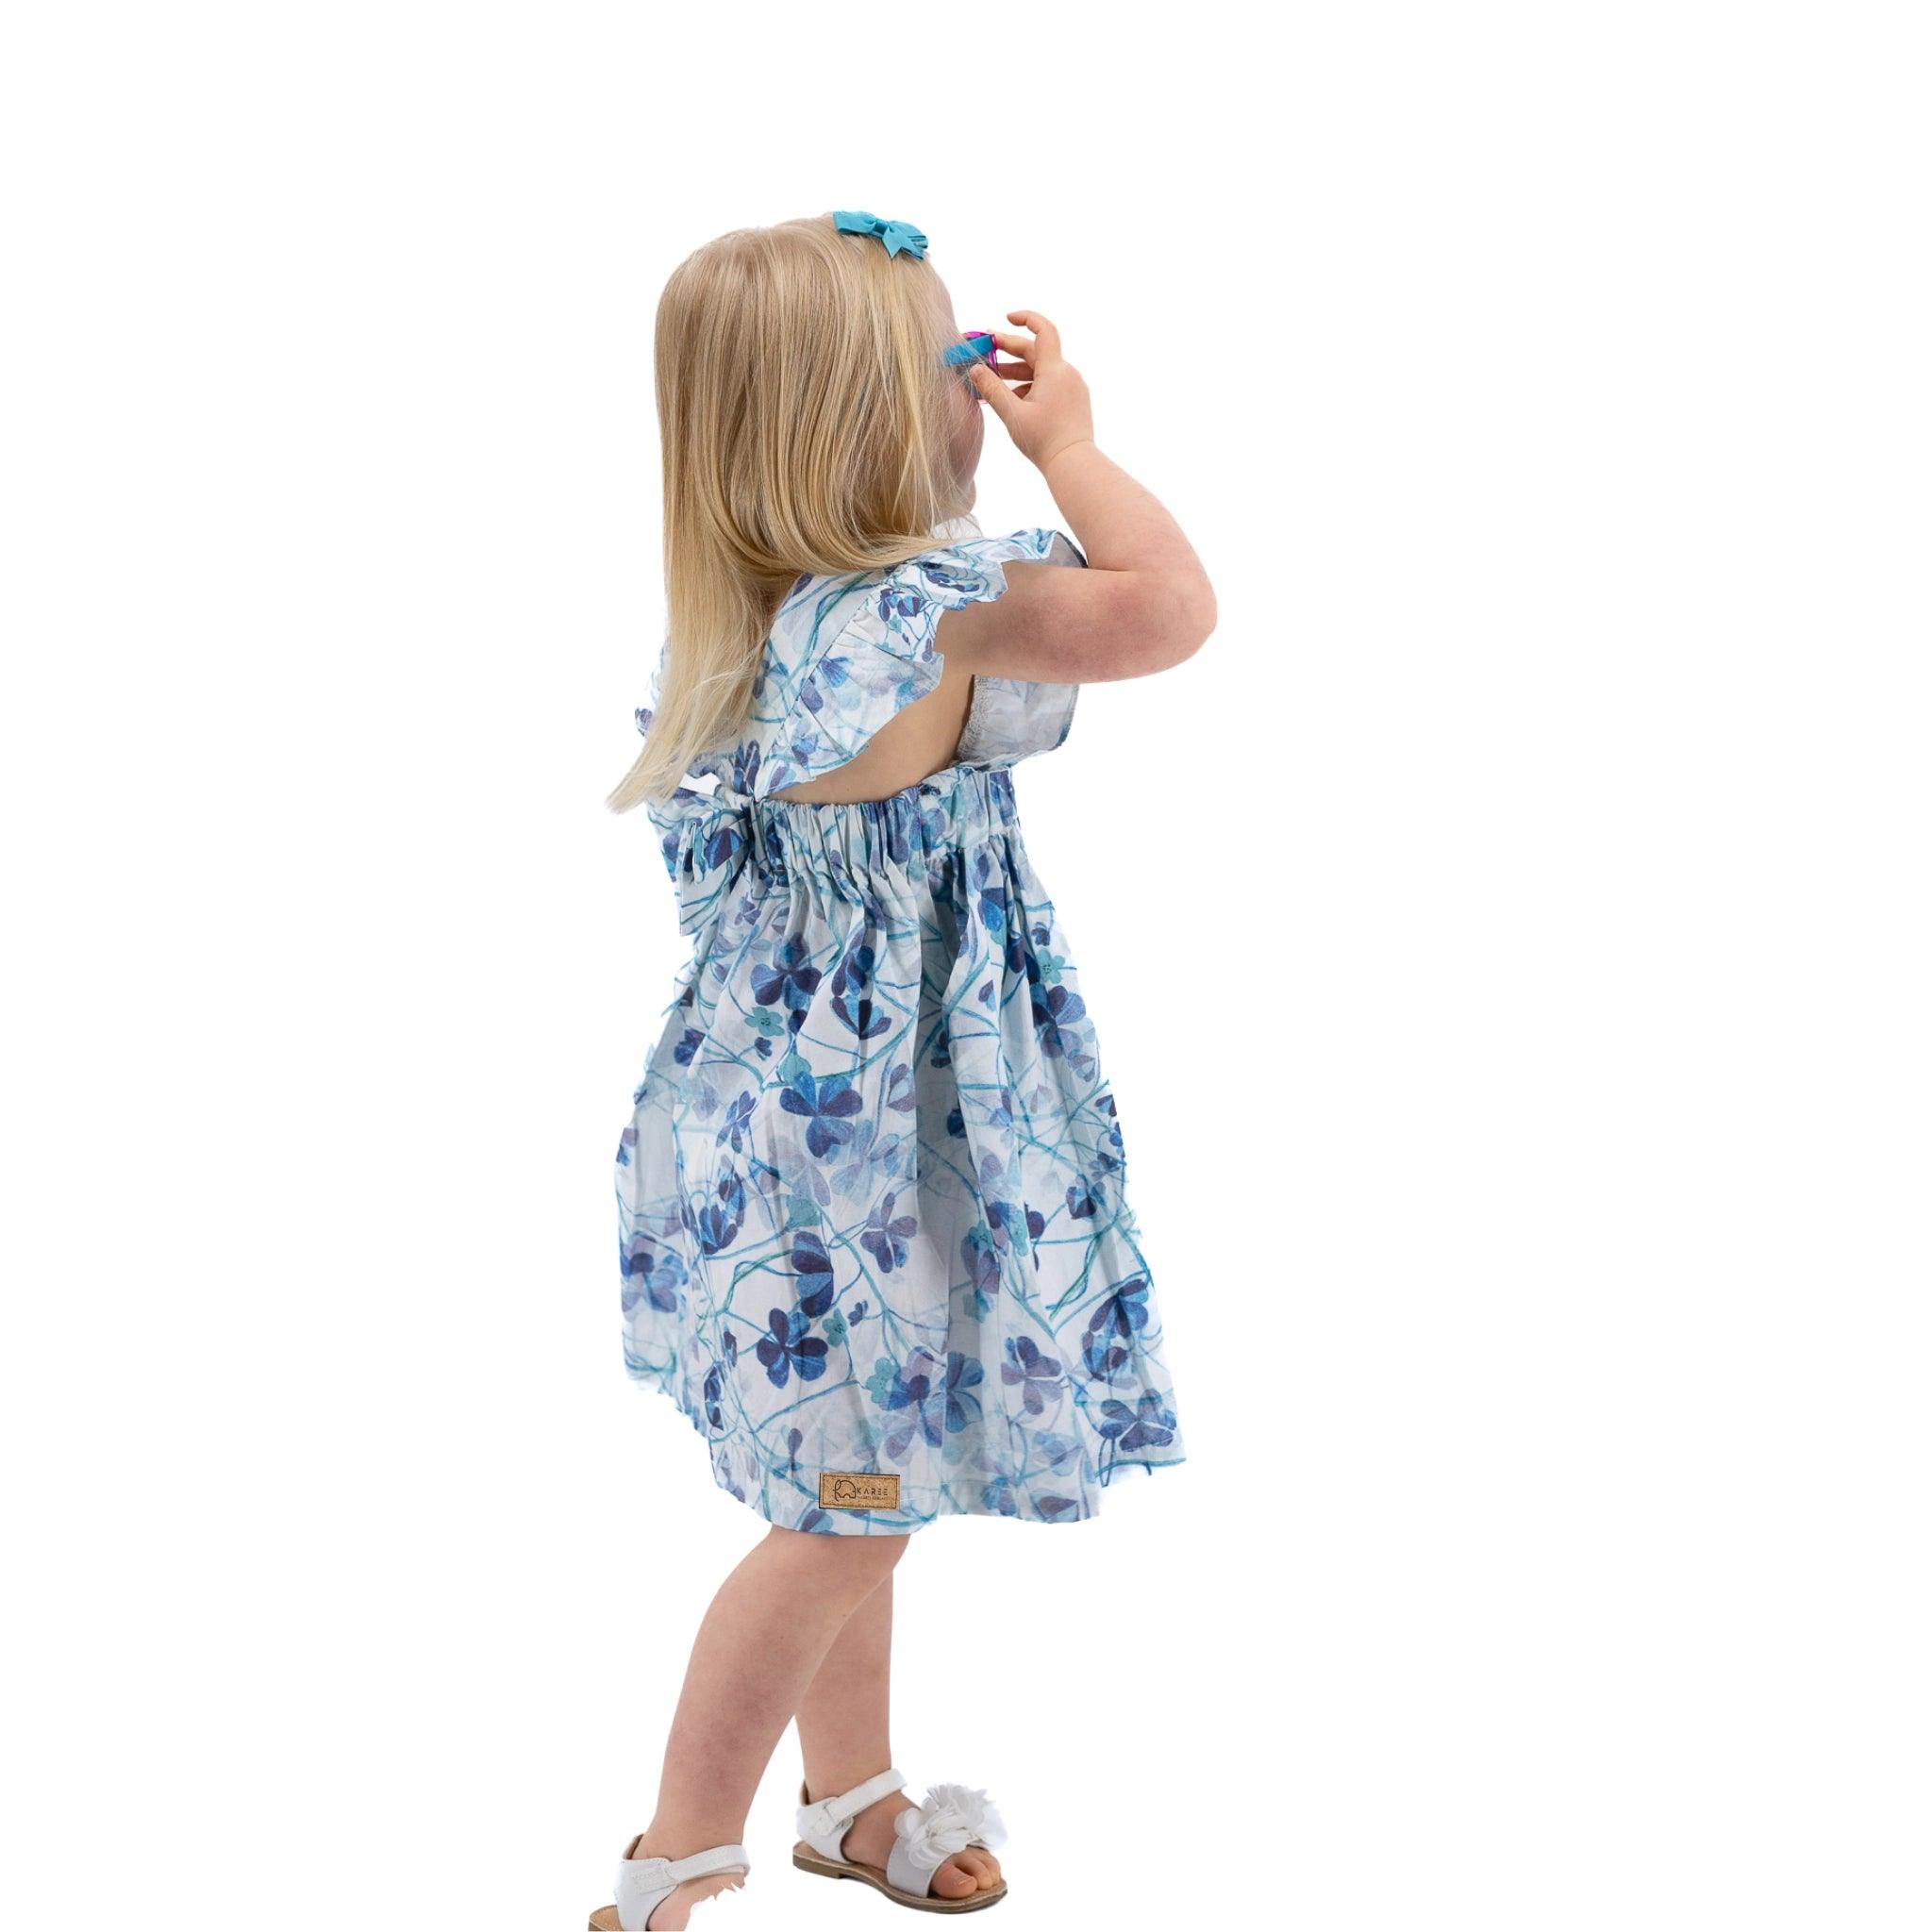 Young girl in a Karee Blue Cotton Floral Dress for Girls standing and looking up, holding a blue object to her eye, photographed against a white background.